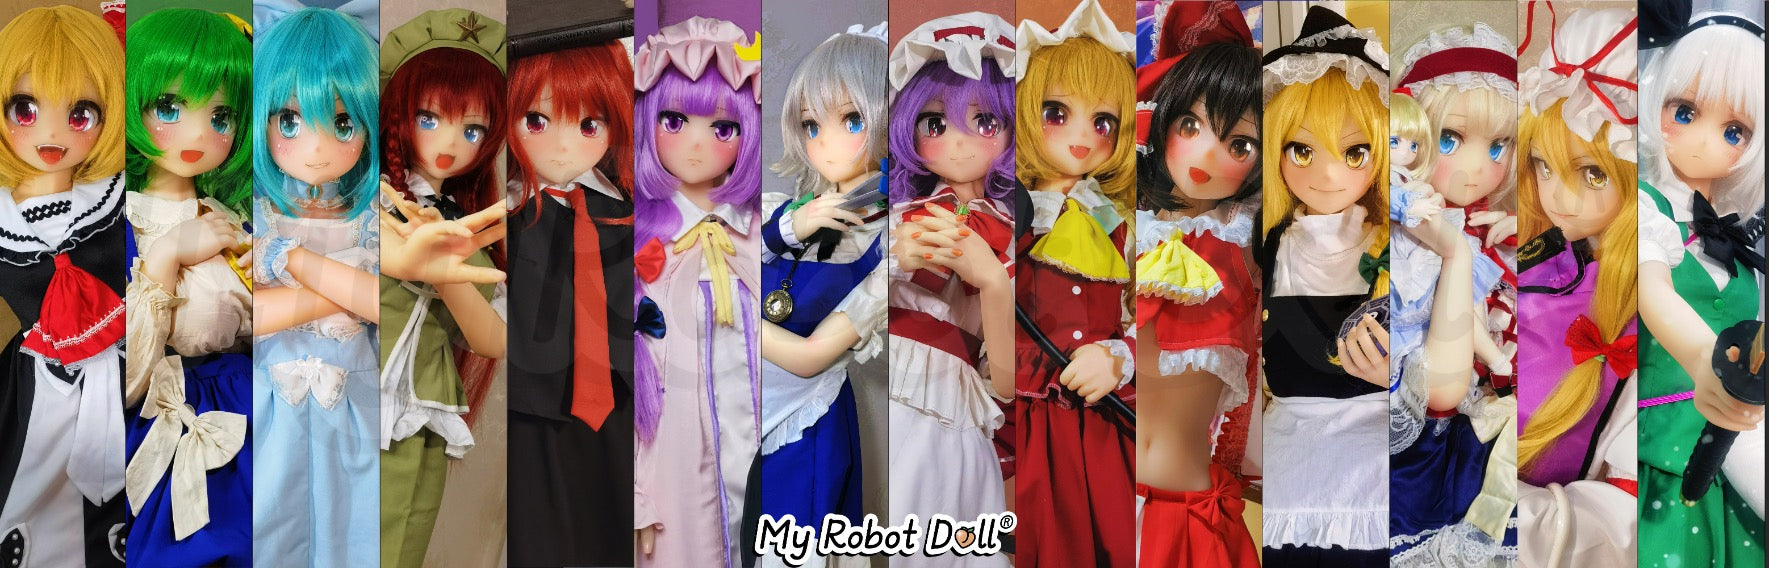 Aotume Anime Sex Dolls Touhou Project